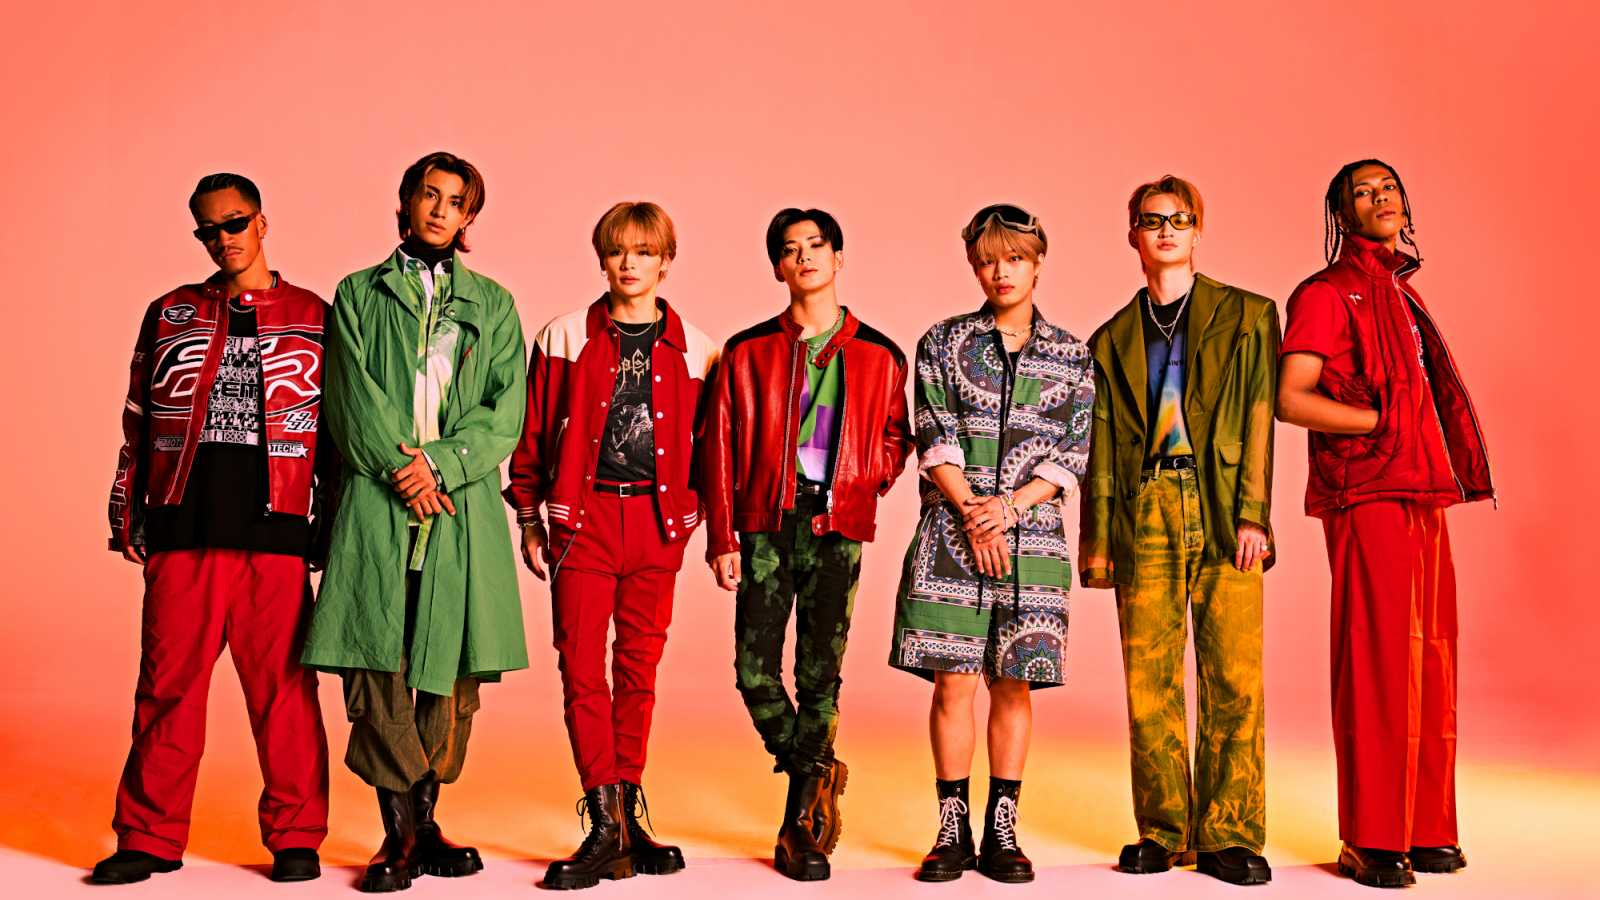 PSYCHIC FEVER from EXILE TRIBE lança novo EP © LDH. All rights reserved.